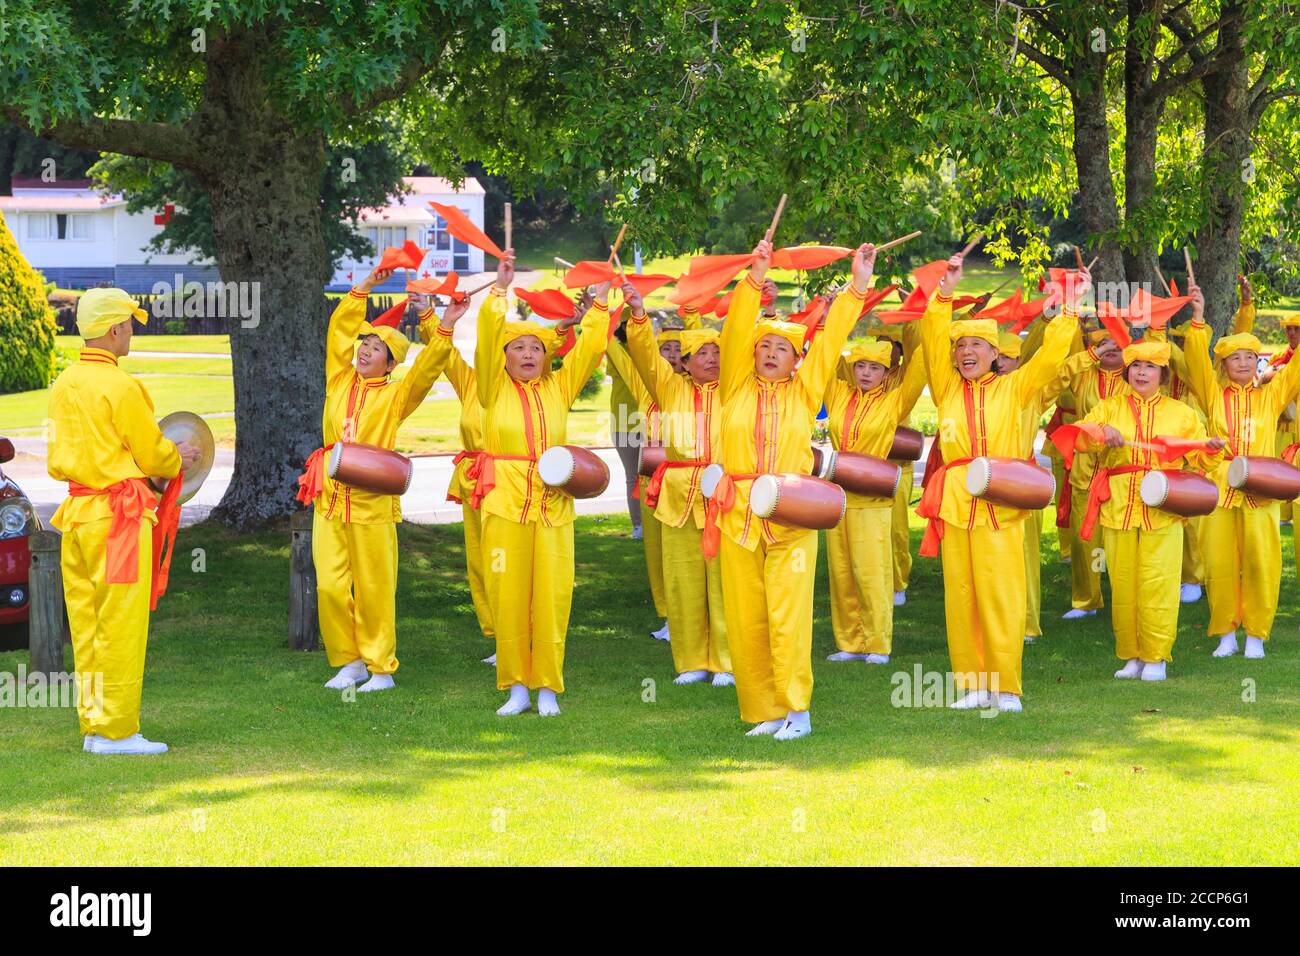 Members of Falun Dafa, aka Falun Gong, a Chinese religious movement, practicing a dance with scarves and waist drums. Rotorua, New Zealand, 12/8/2018 Stock Photo